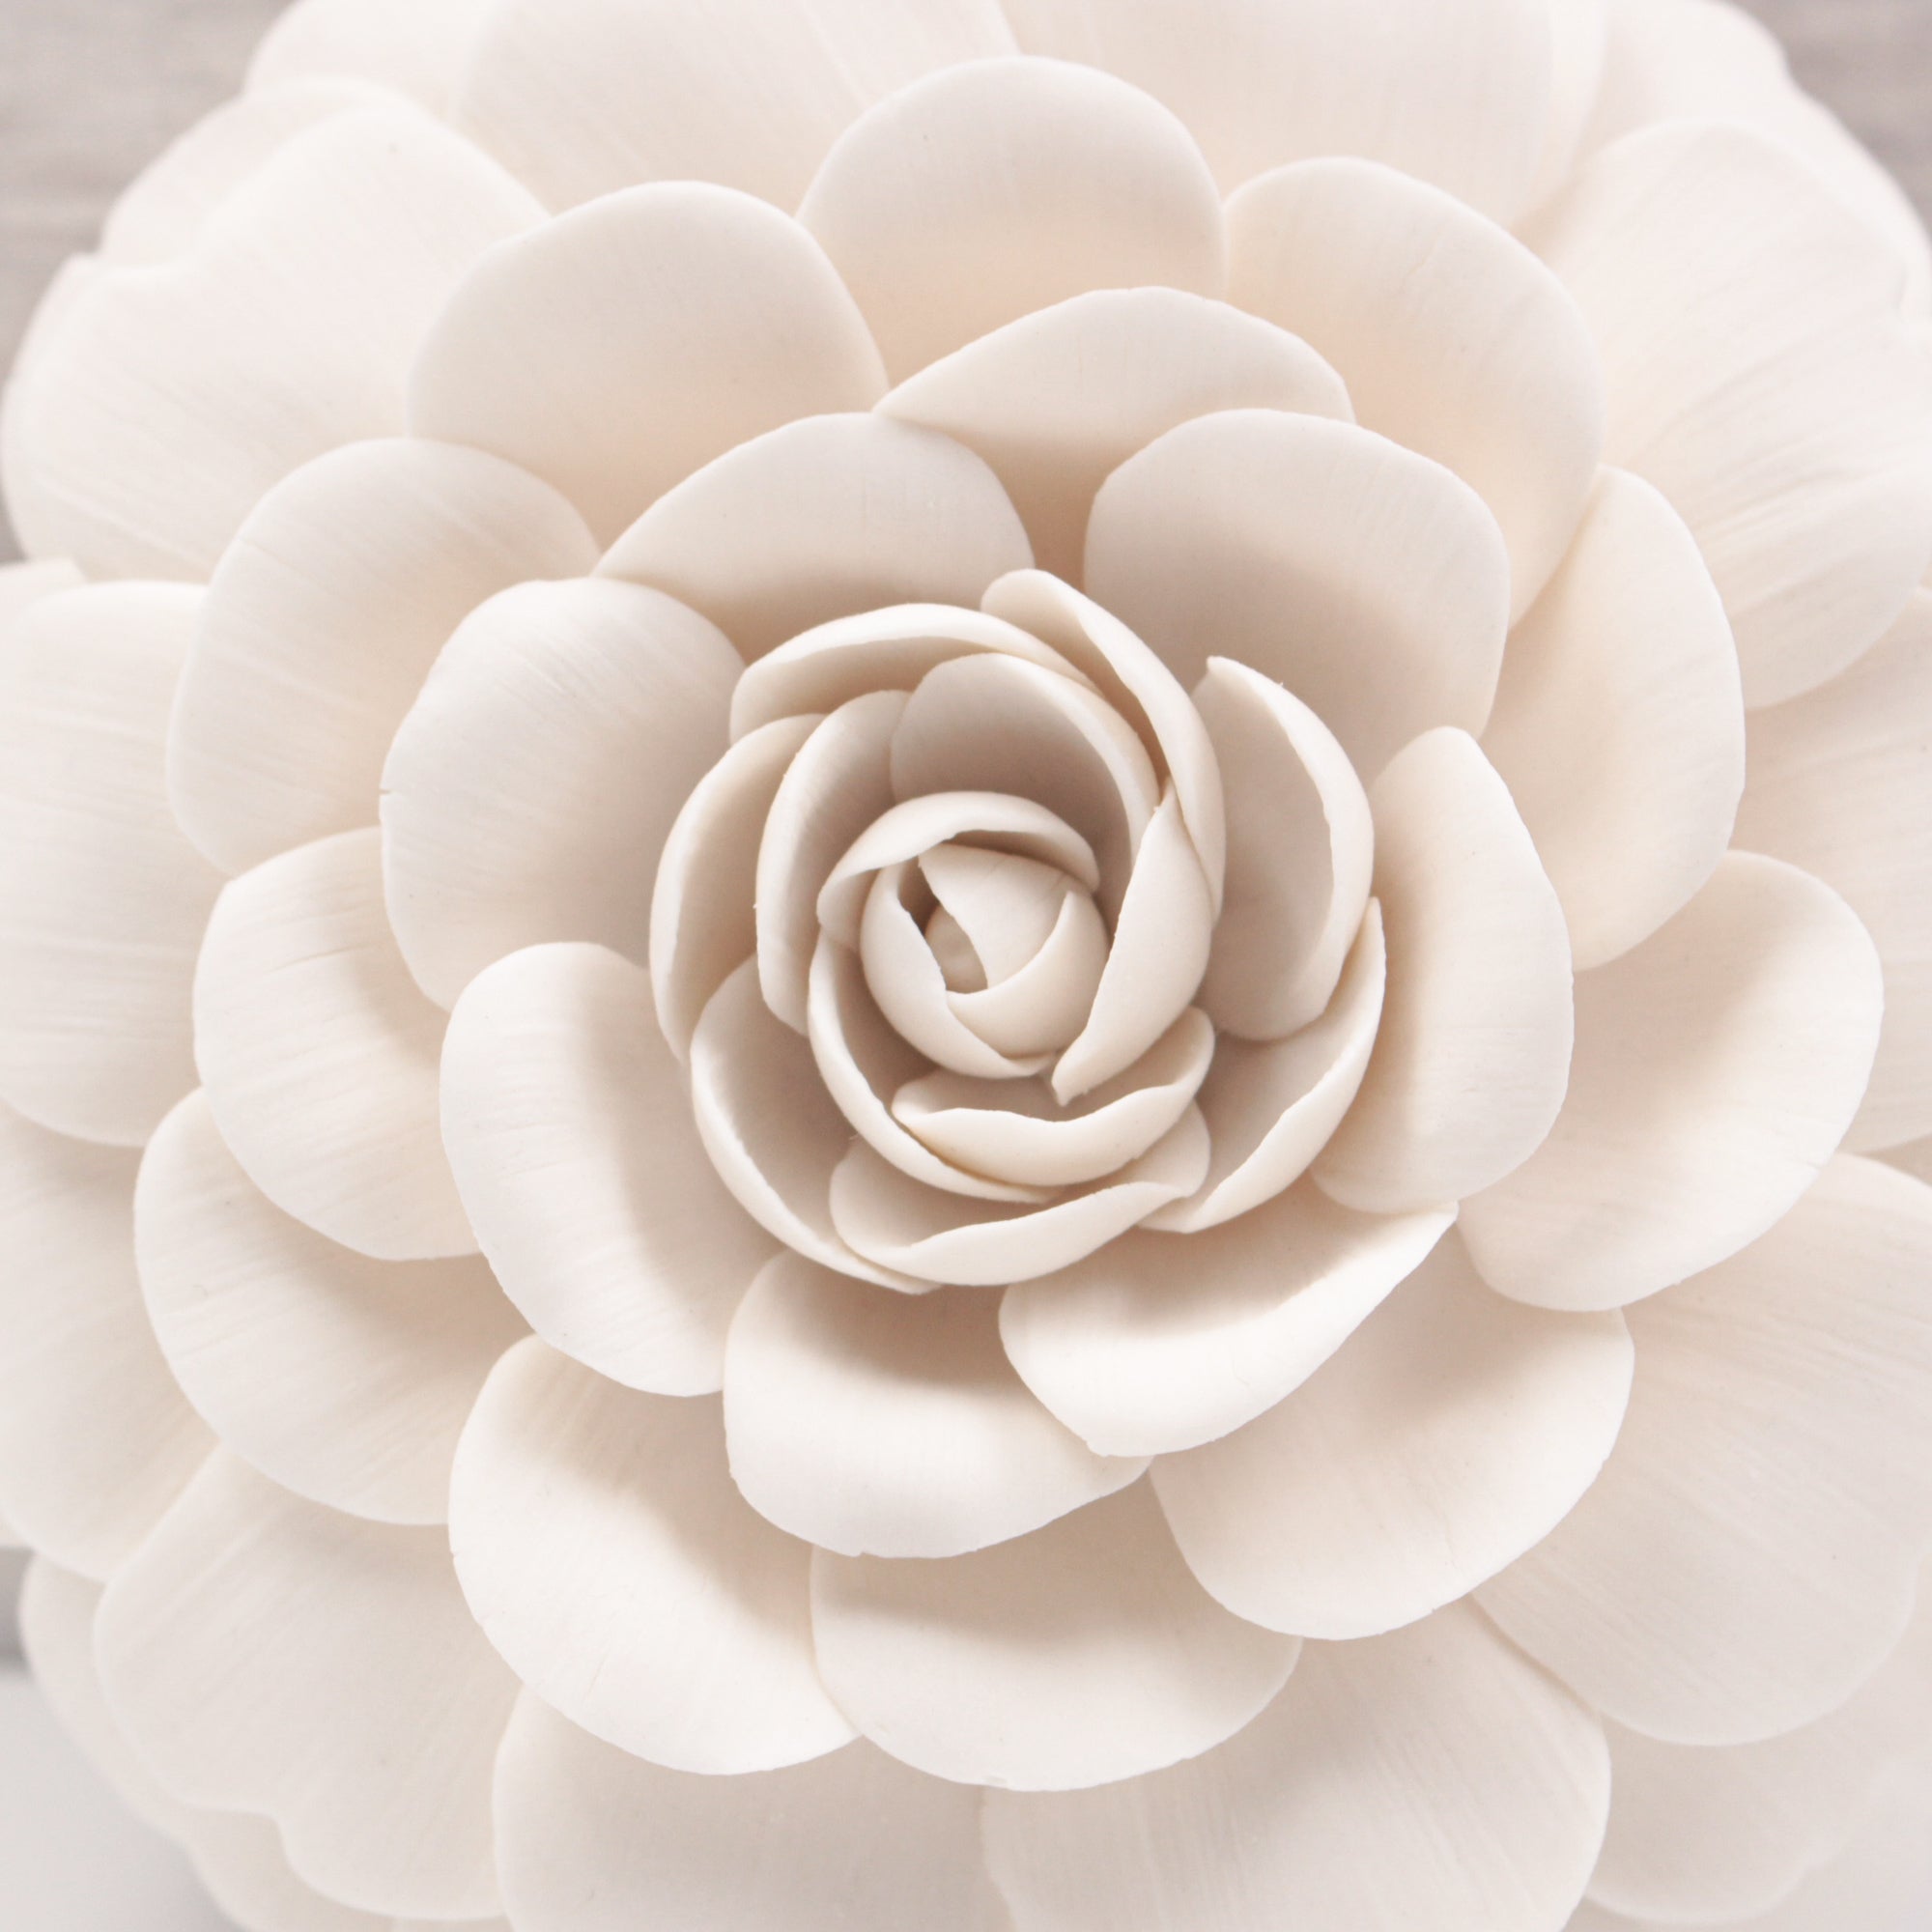 Large Porcelain Camellia- Handmade Porcelain Flower for Interior and Event Decoration - Made in France by Alain Granell 